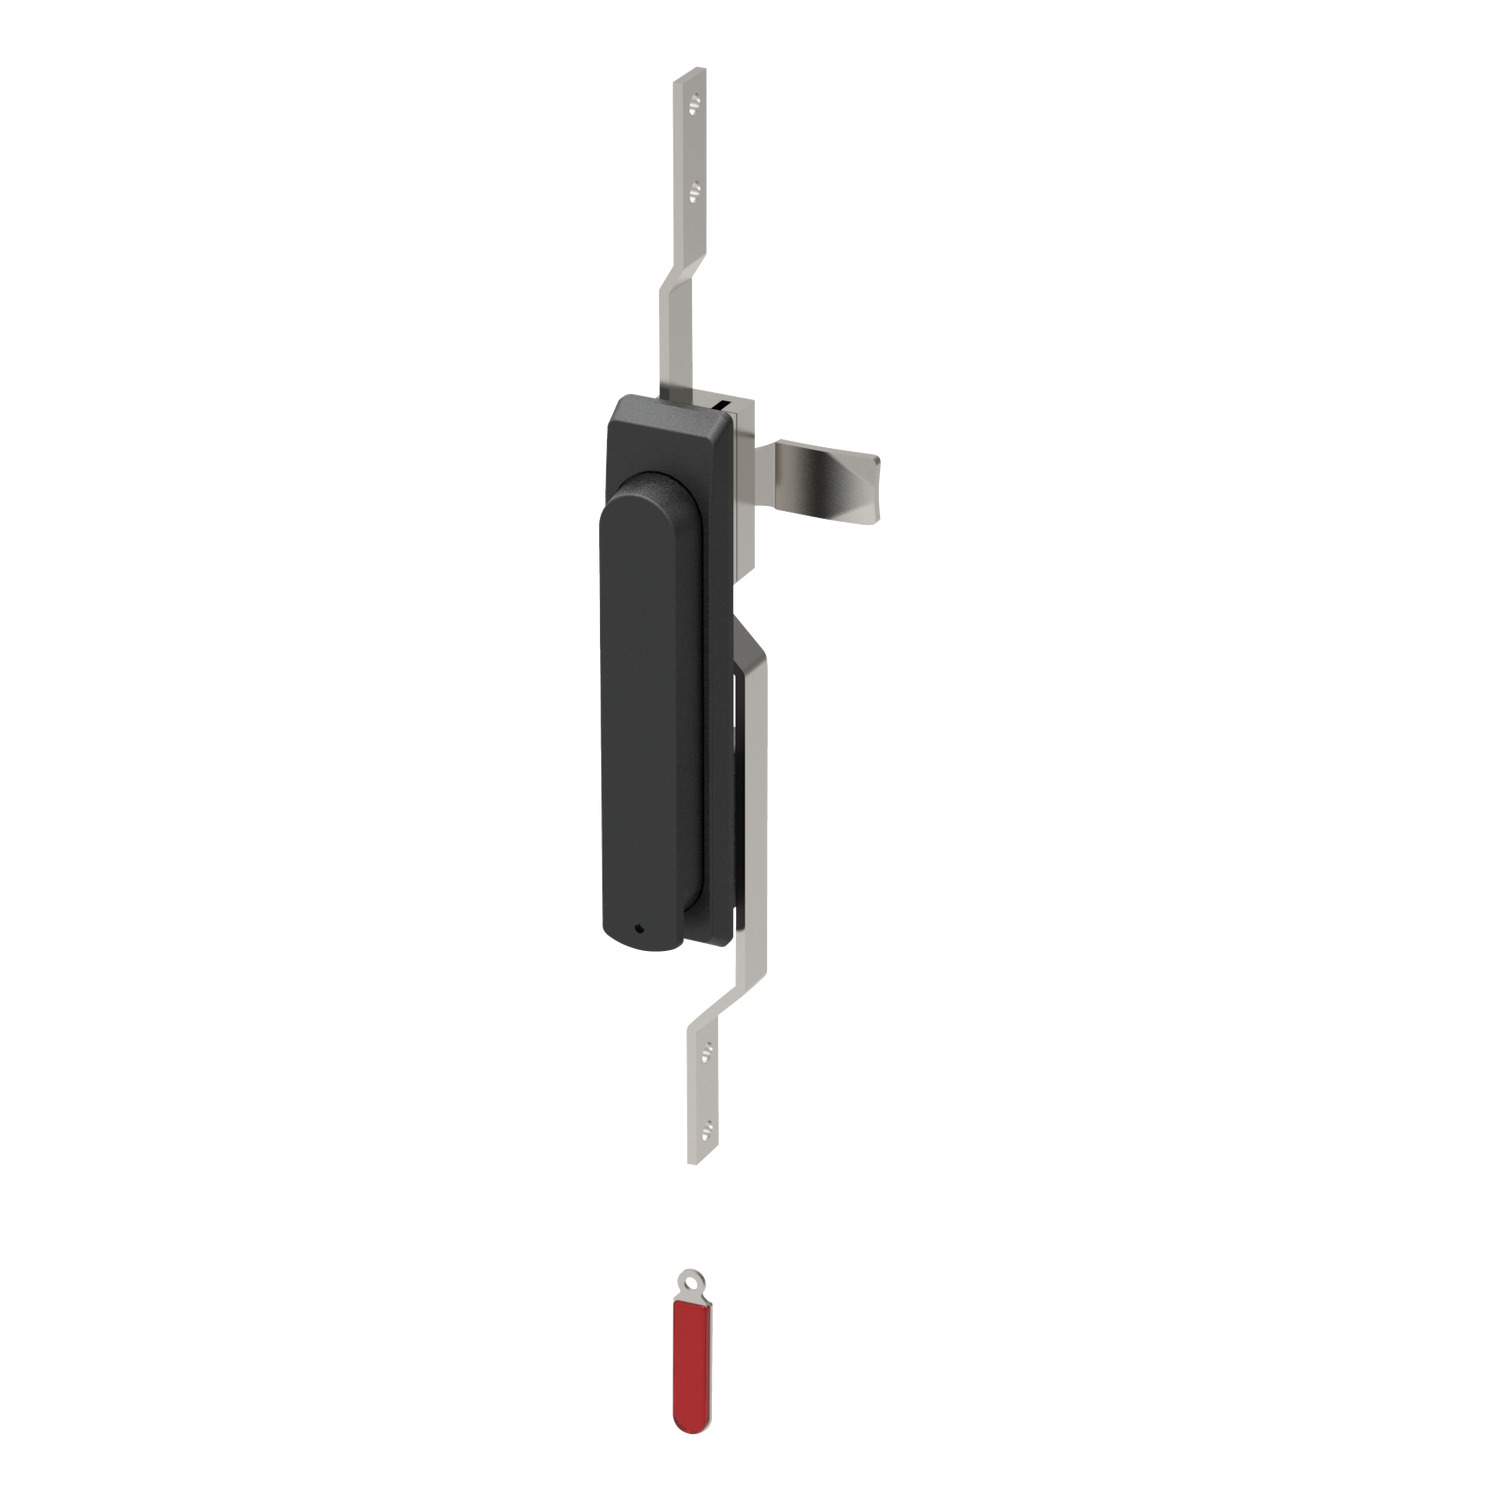 B2084.AW0010 Swing Handles with rod control